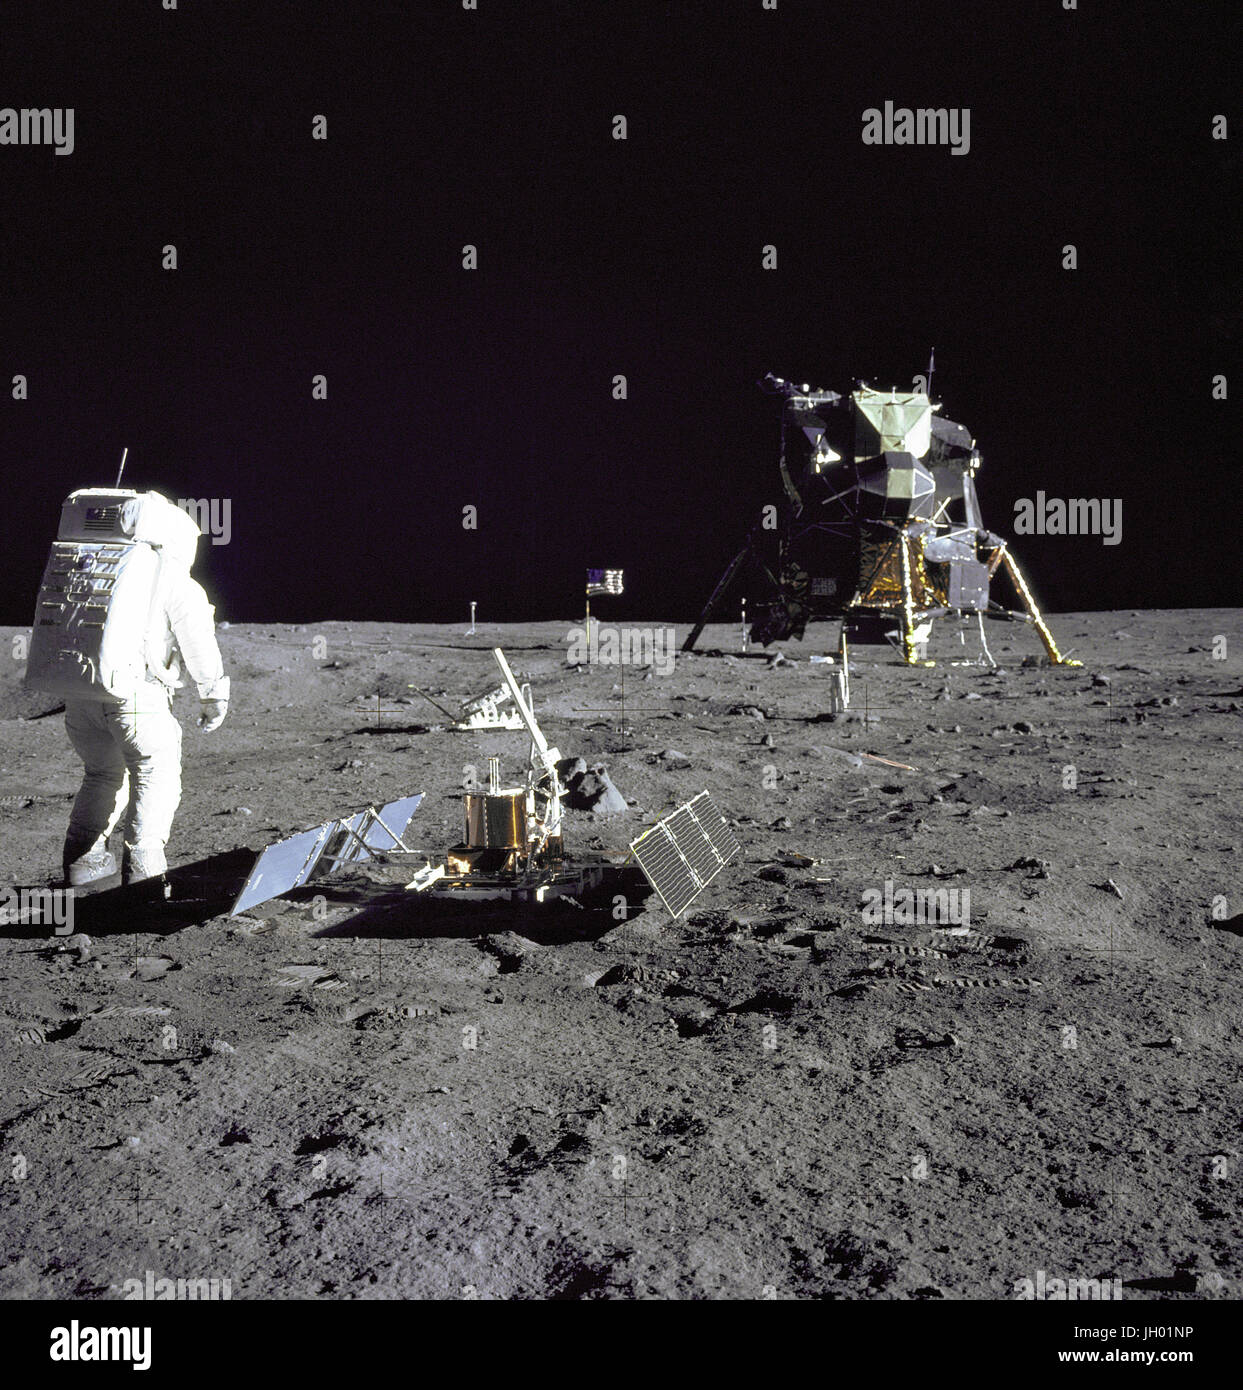 Astronaut Edwin E.'Buzz' Aldrin Jr., Lunar Module pilot, is photographed during the Apollo 11 extravehicular activity on the Moon. He has just deployed the Early Apollo Scientific Experiments Package (EASEP). In the foreground is the Passive Seismic Experiment Package (PSEP); beyond it is the Laser Ranging Retro-Reflector (LR-3); in the center background is the United States flag; in the left background is the black and white lunar surface television camera; in the far right background is the Lunar Module 'Eagle'. Astronaut Neil A. Armstrong, commander, took this photograph with a 70mm Hasselb Stock Photo